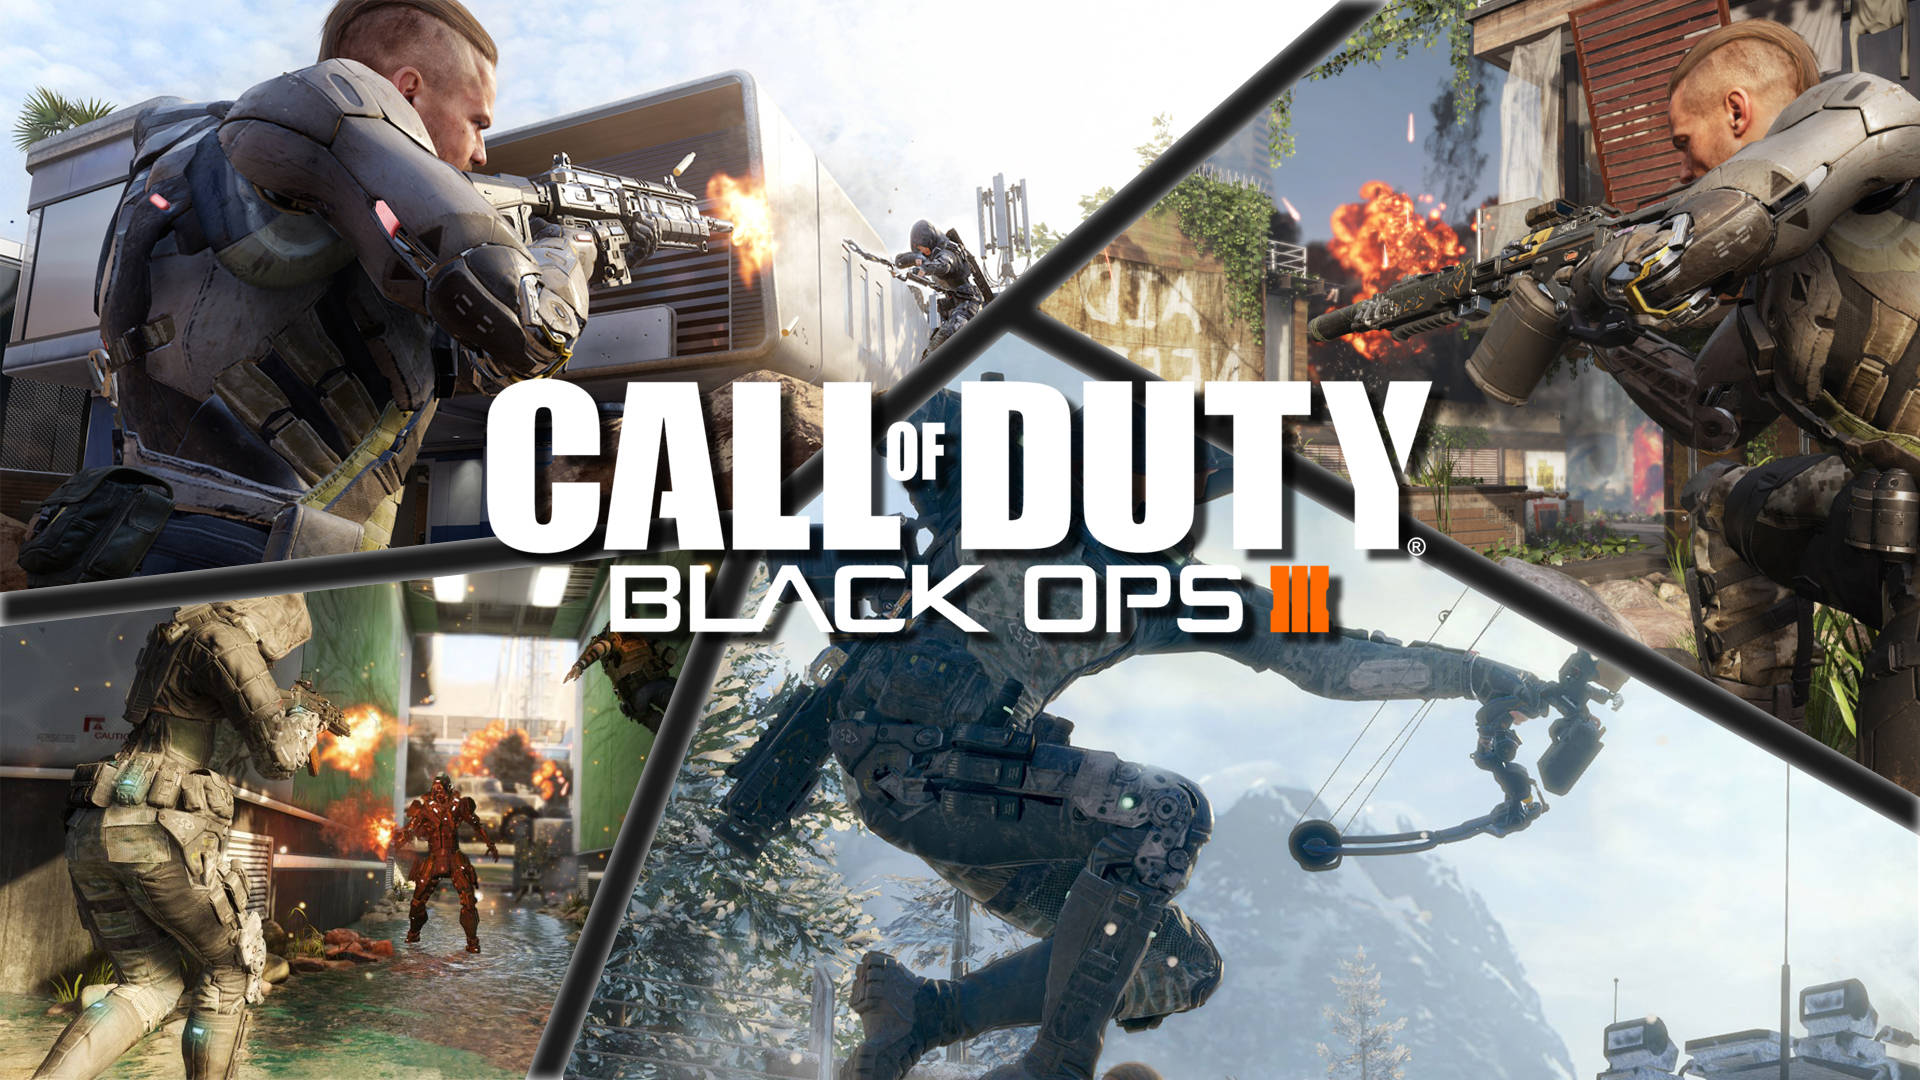 Prepare for the Call of Duty Black Ops 3 Wallpaper